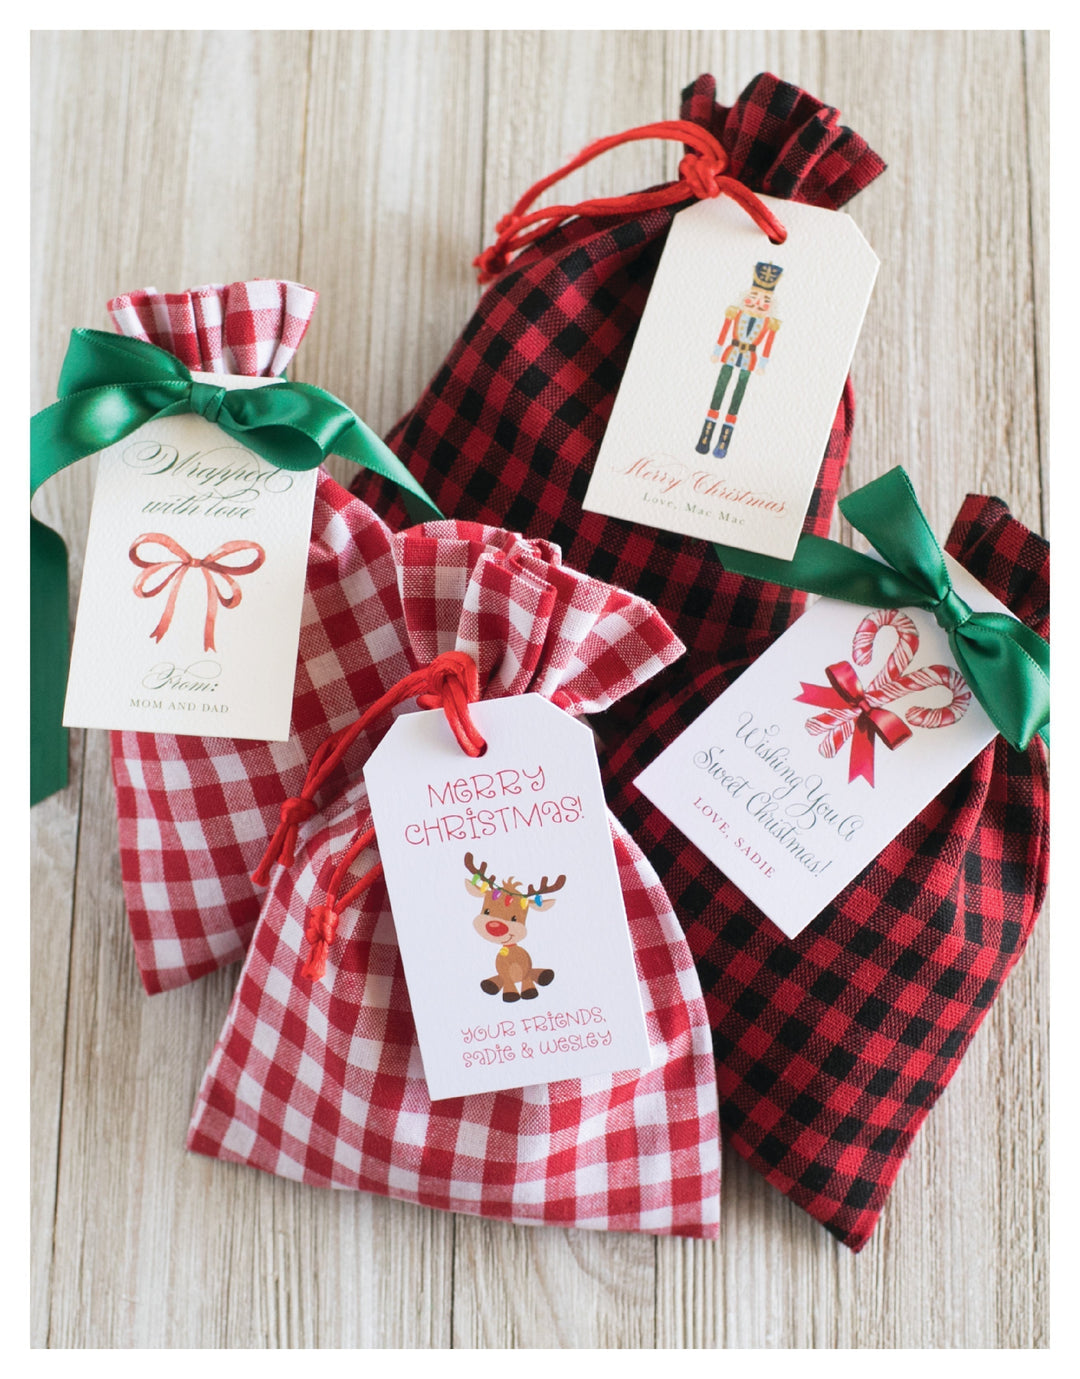 The Hollands II Christmas Gift Tag